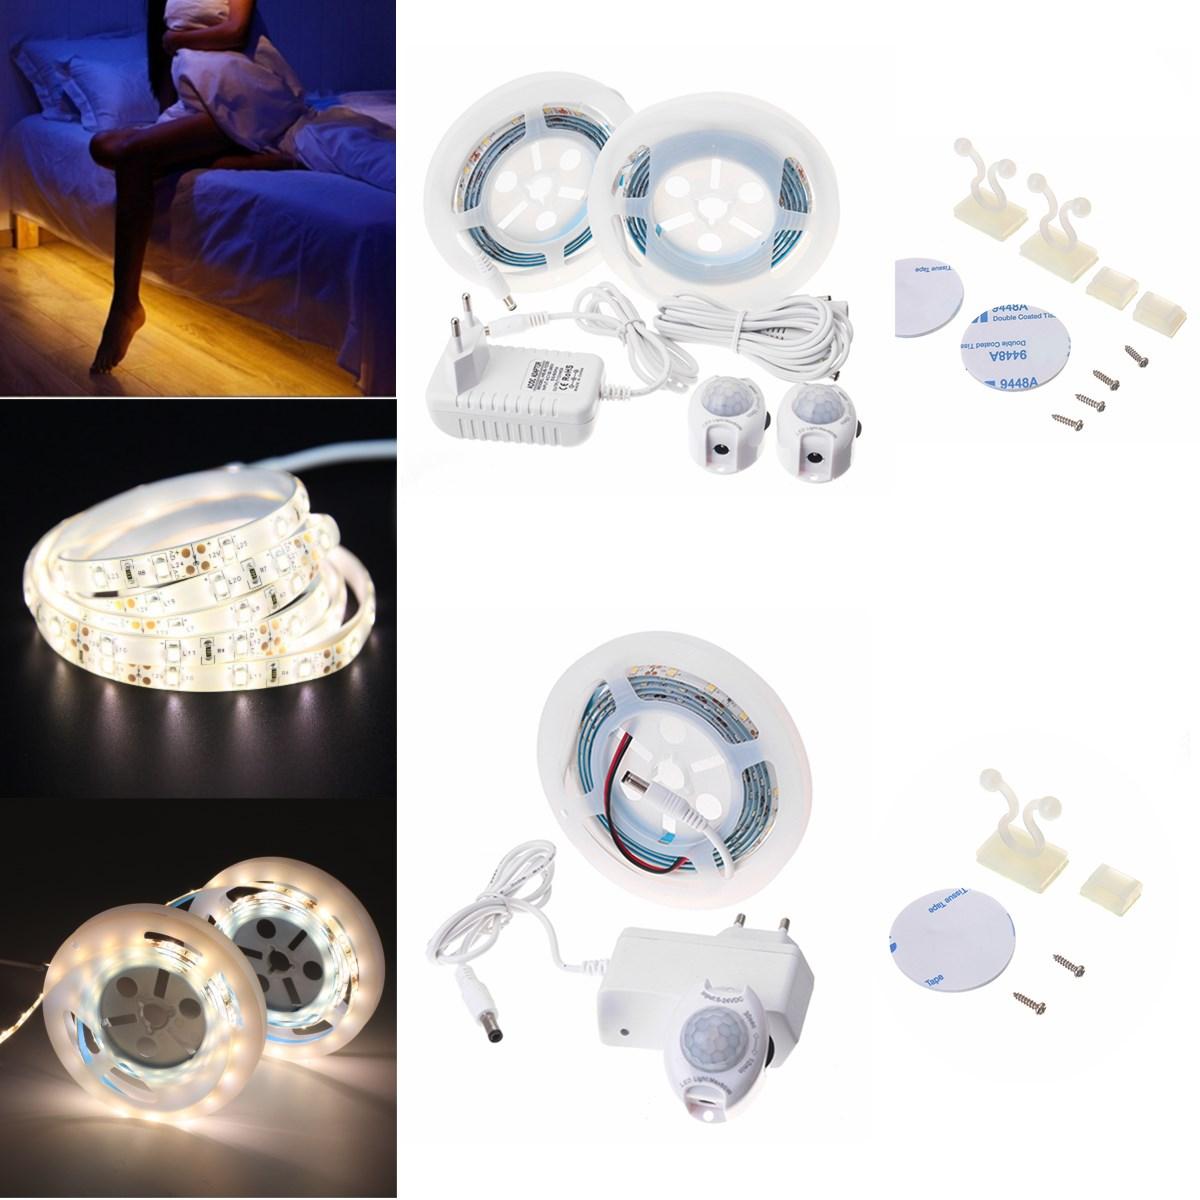 1.5M 3M Motion Activated Sensor Flexible LED Strip Light Bed Night Lamp with Switch EU Plug DC12V, Banggood  - buy with discount